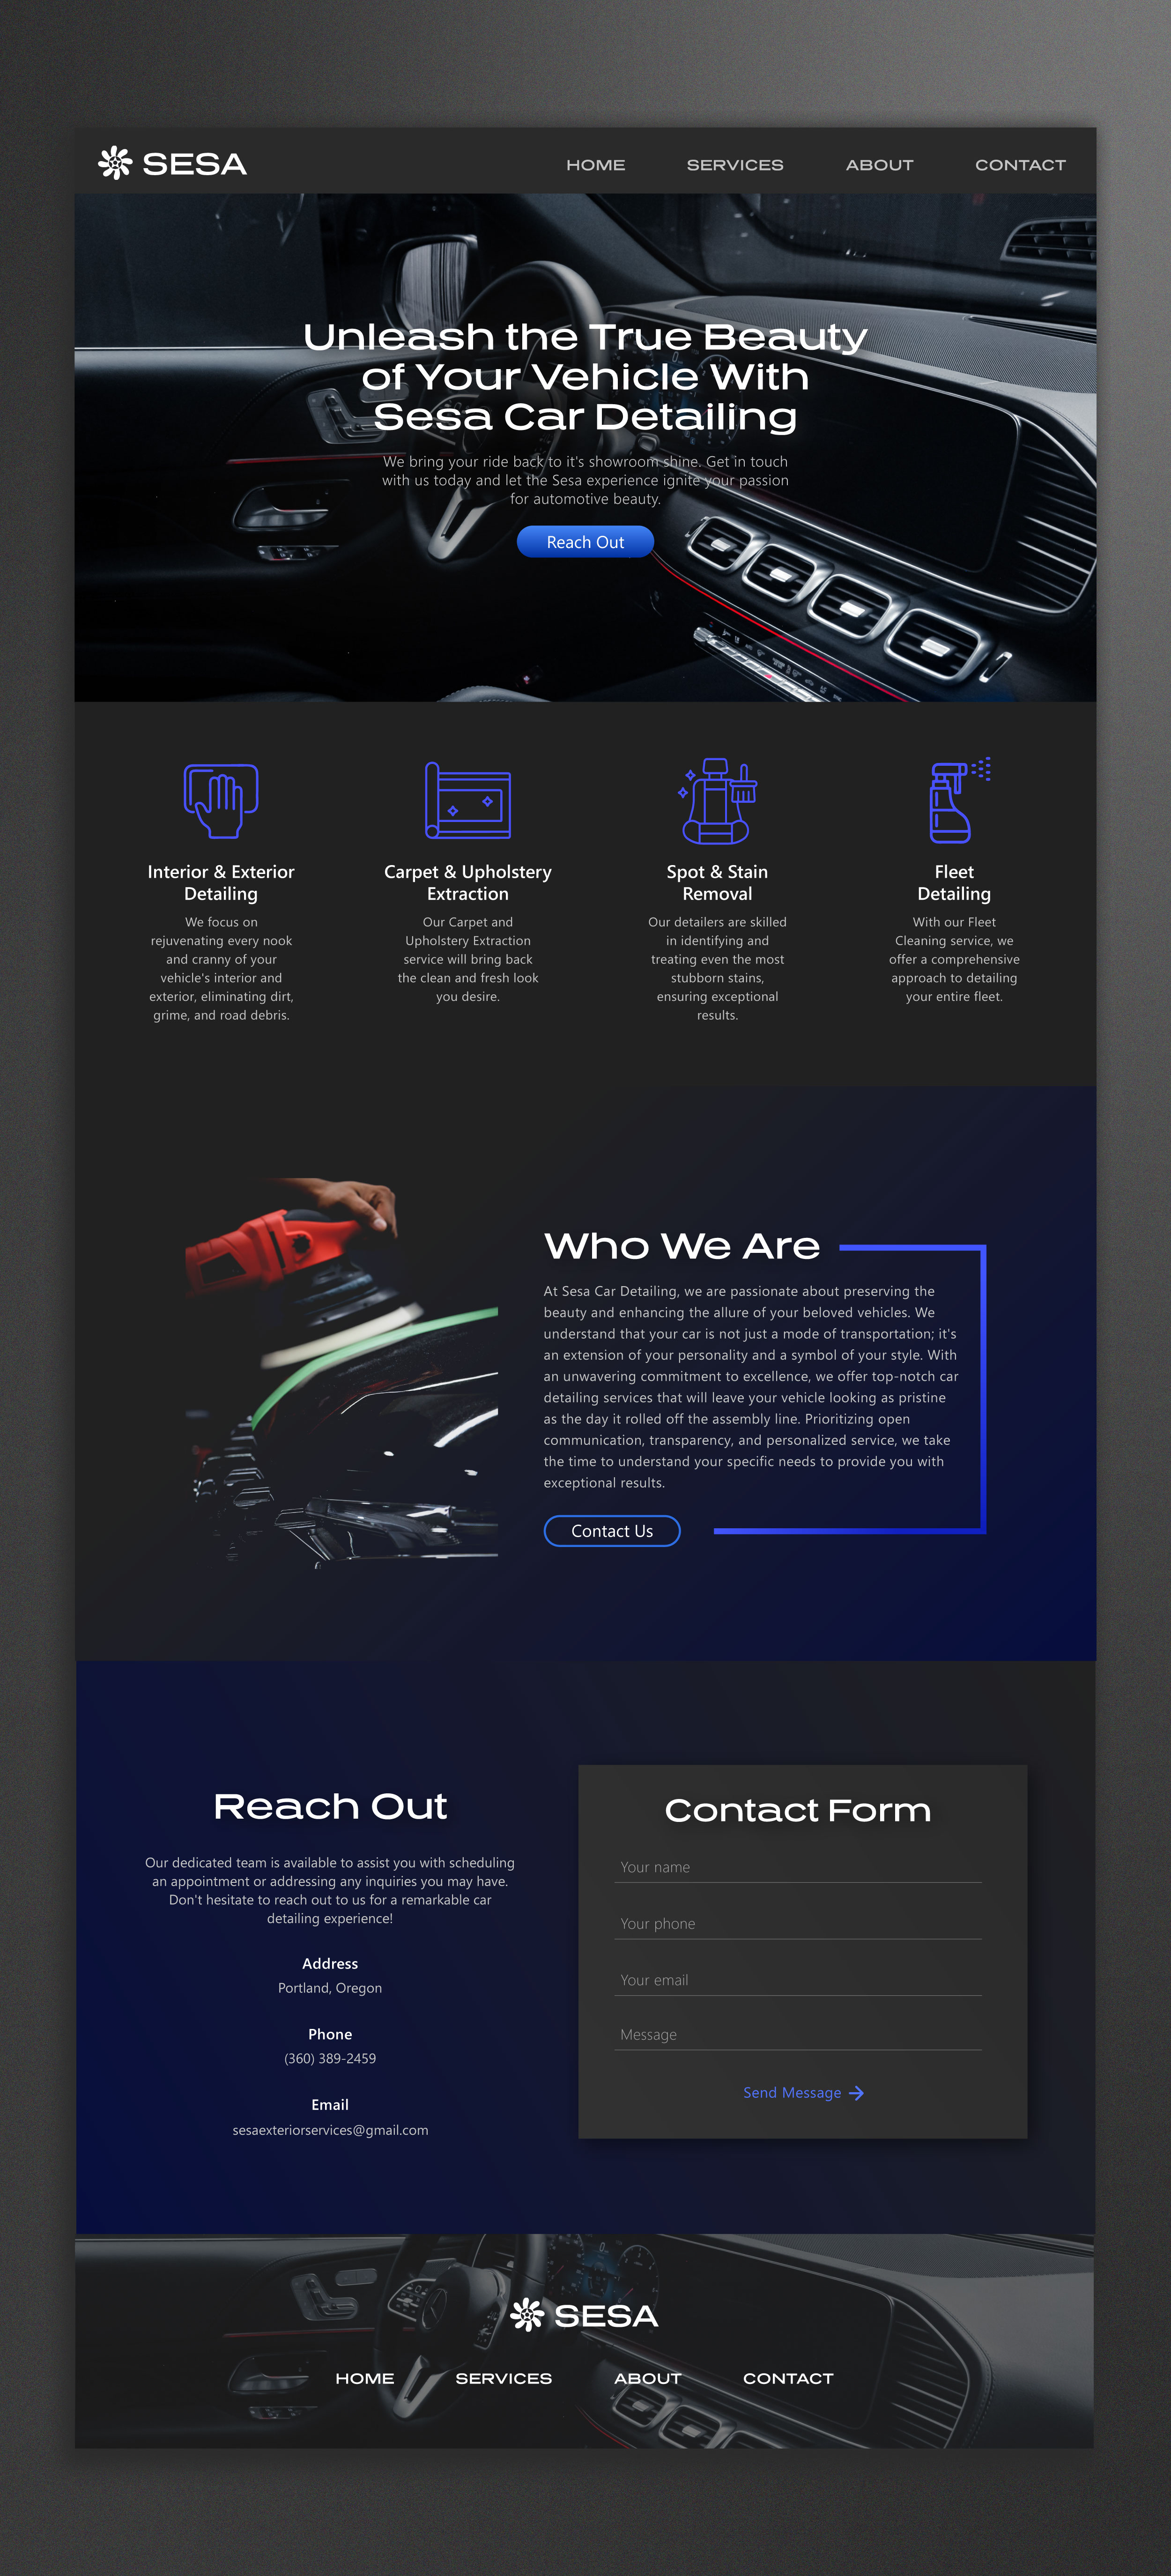 Full view of visual website design for the car detailing company, Sesa Services